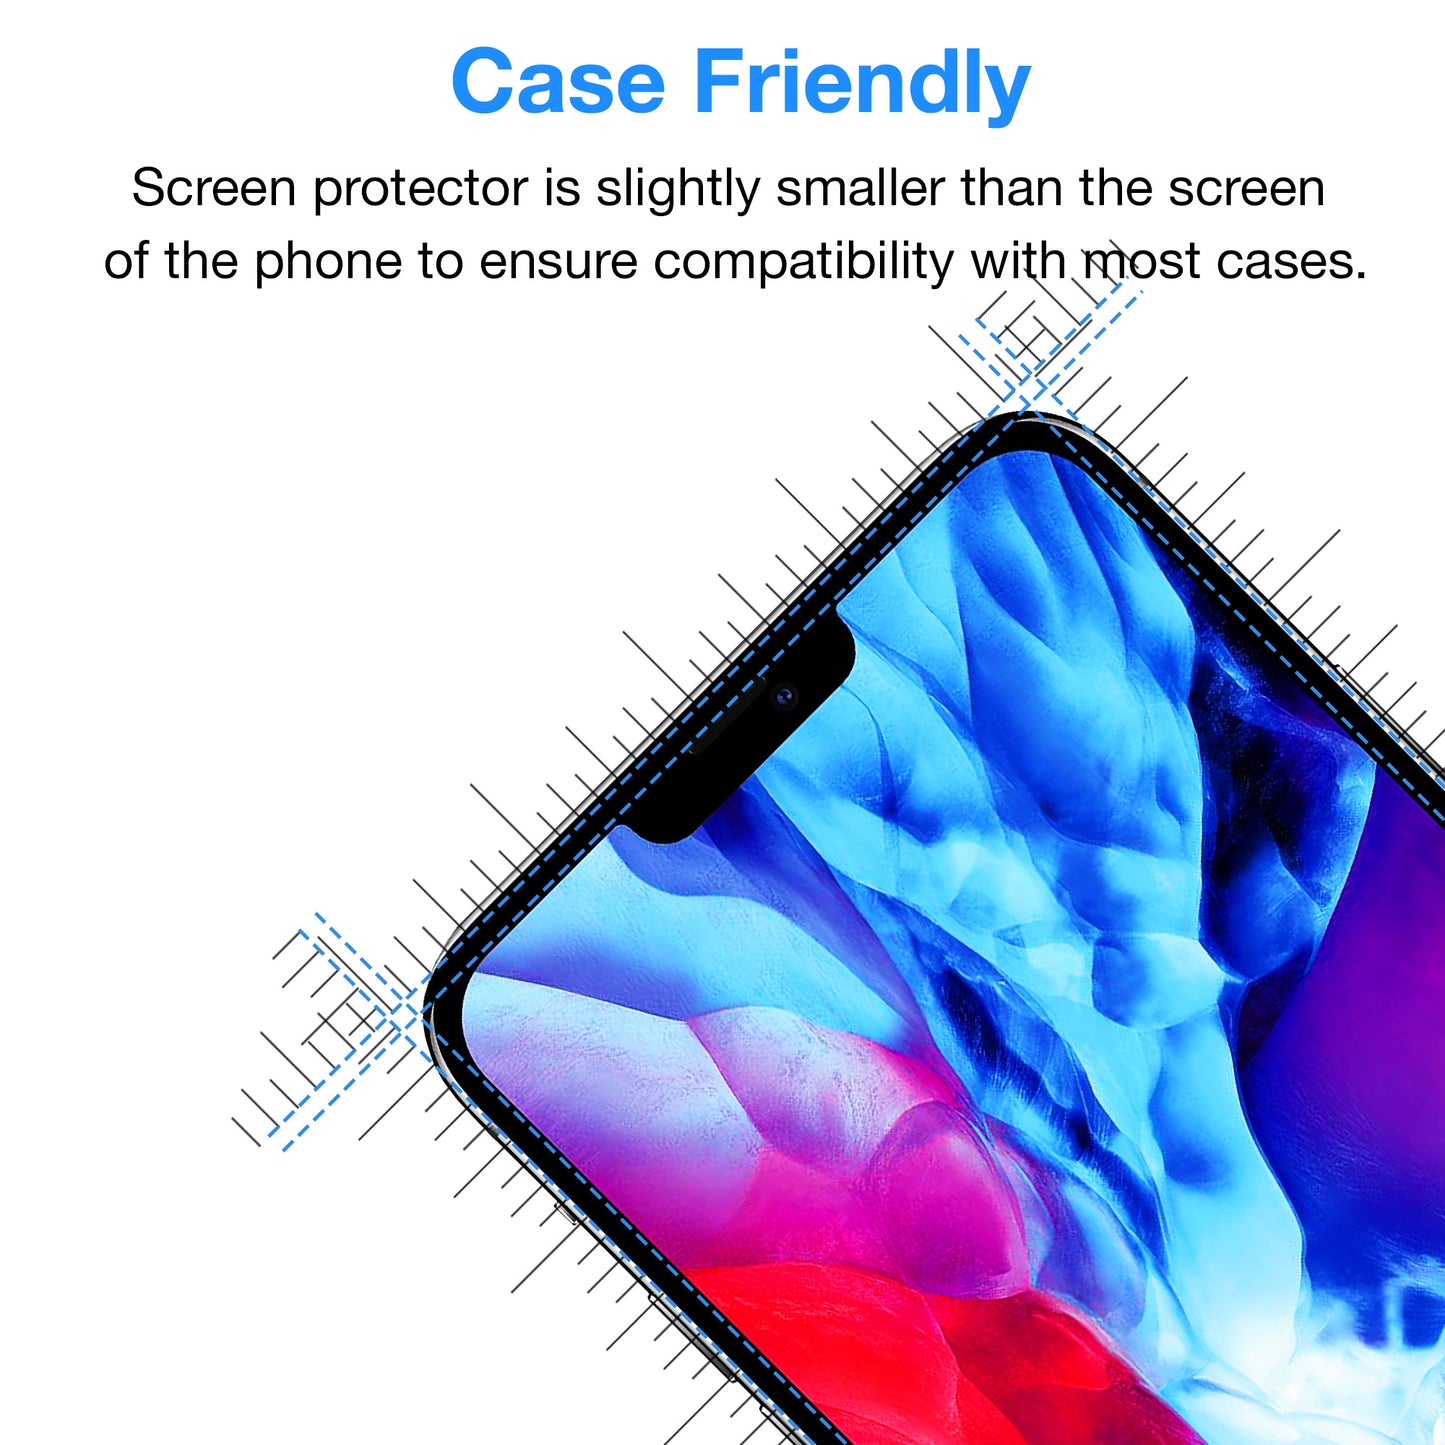 [2 Pack] MEZON Tempered Glass for iPhone 13 Pro (6.1") Crystal Clear Premium 9H HD Case Friendly Screen Protector